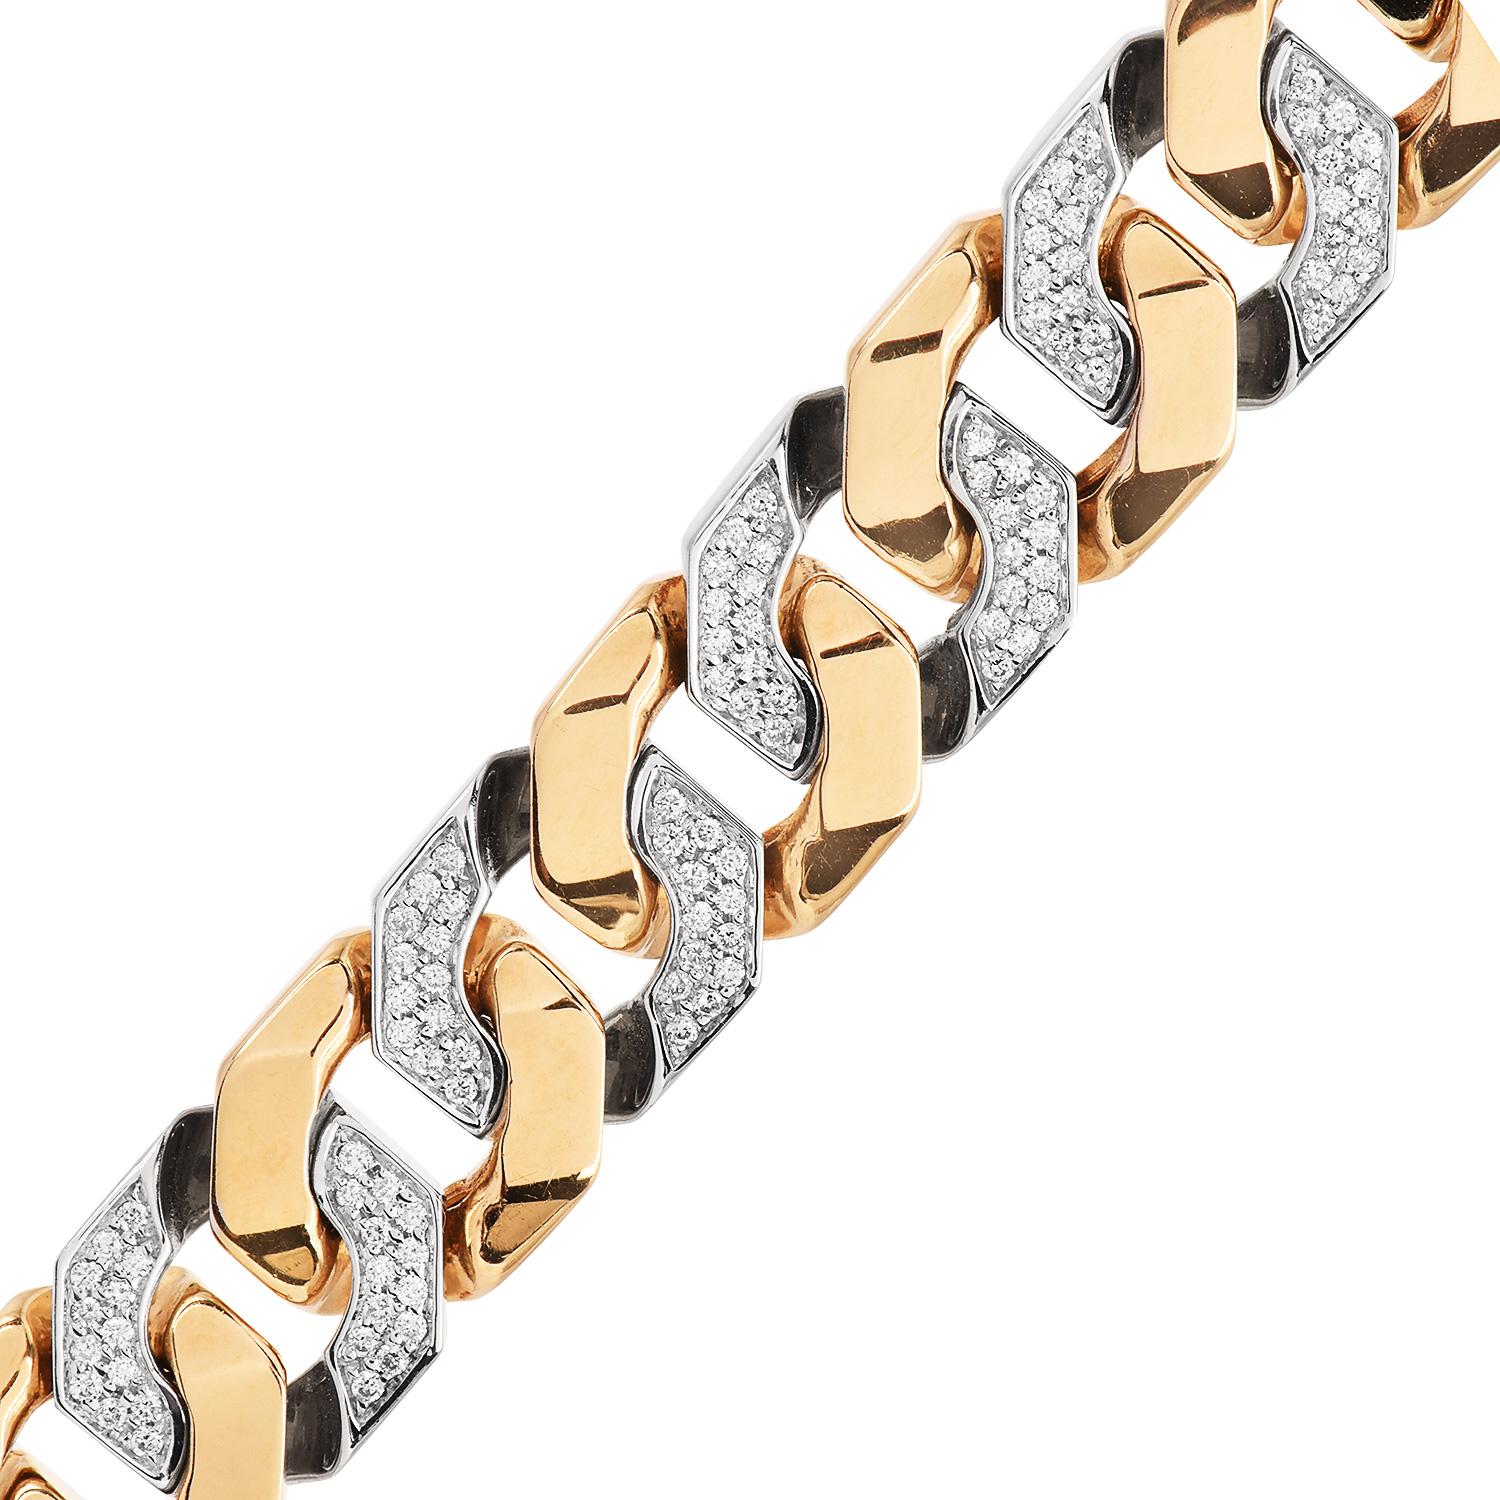 Enjoy this high-quality  Large interconnecting Square Curb link to create the design of this Bold Diamond Bracelet.

Crafted in both 18K yellow, this bracelet measures approximately. 7 Inches x 14mm wide and is adorned in white gold links with over